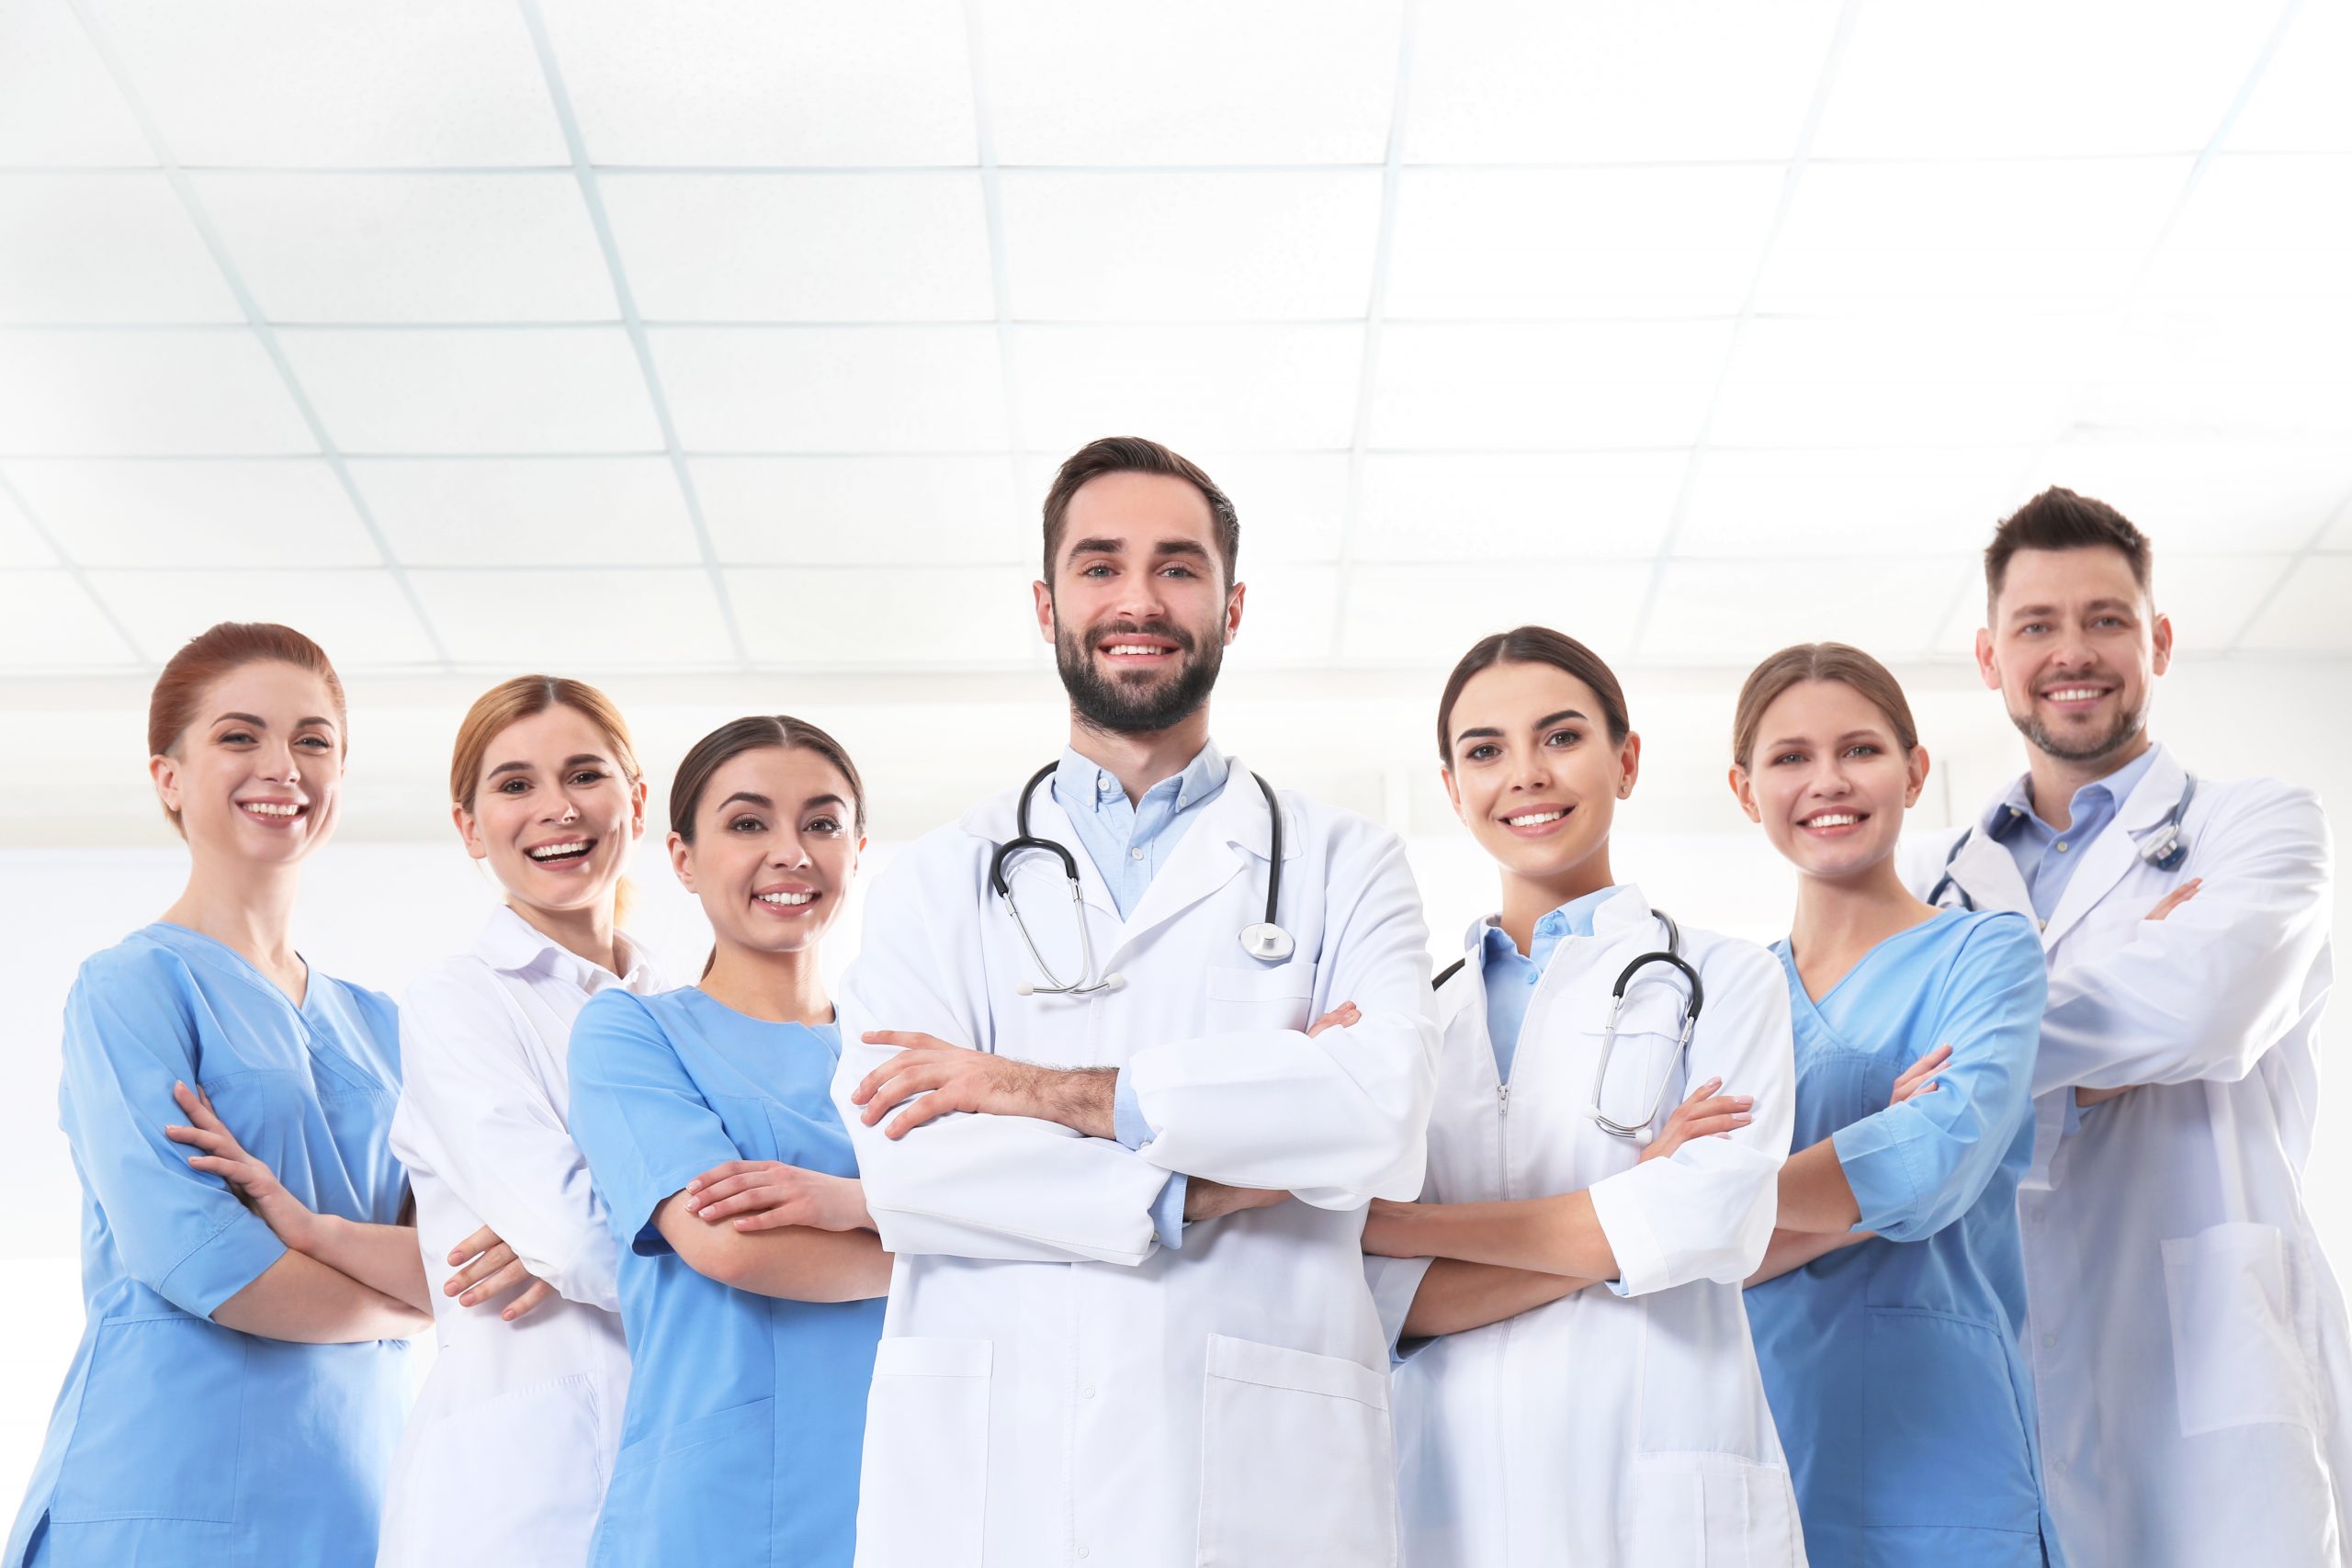 Group,Of,Medical,Doctors,At,Clinic.,Unity,Concept